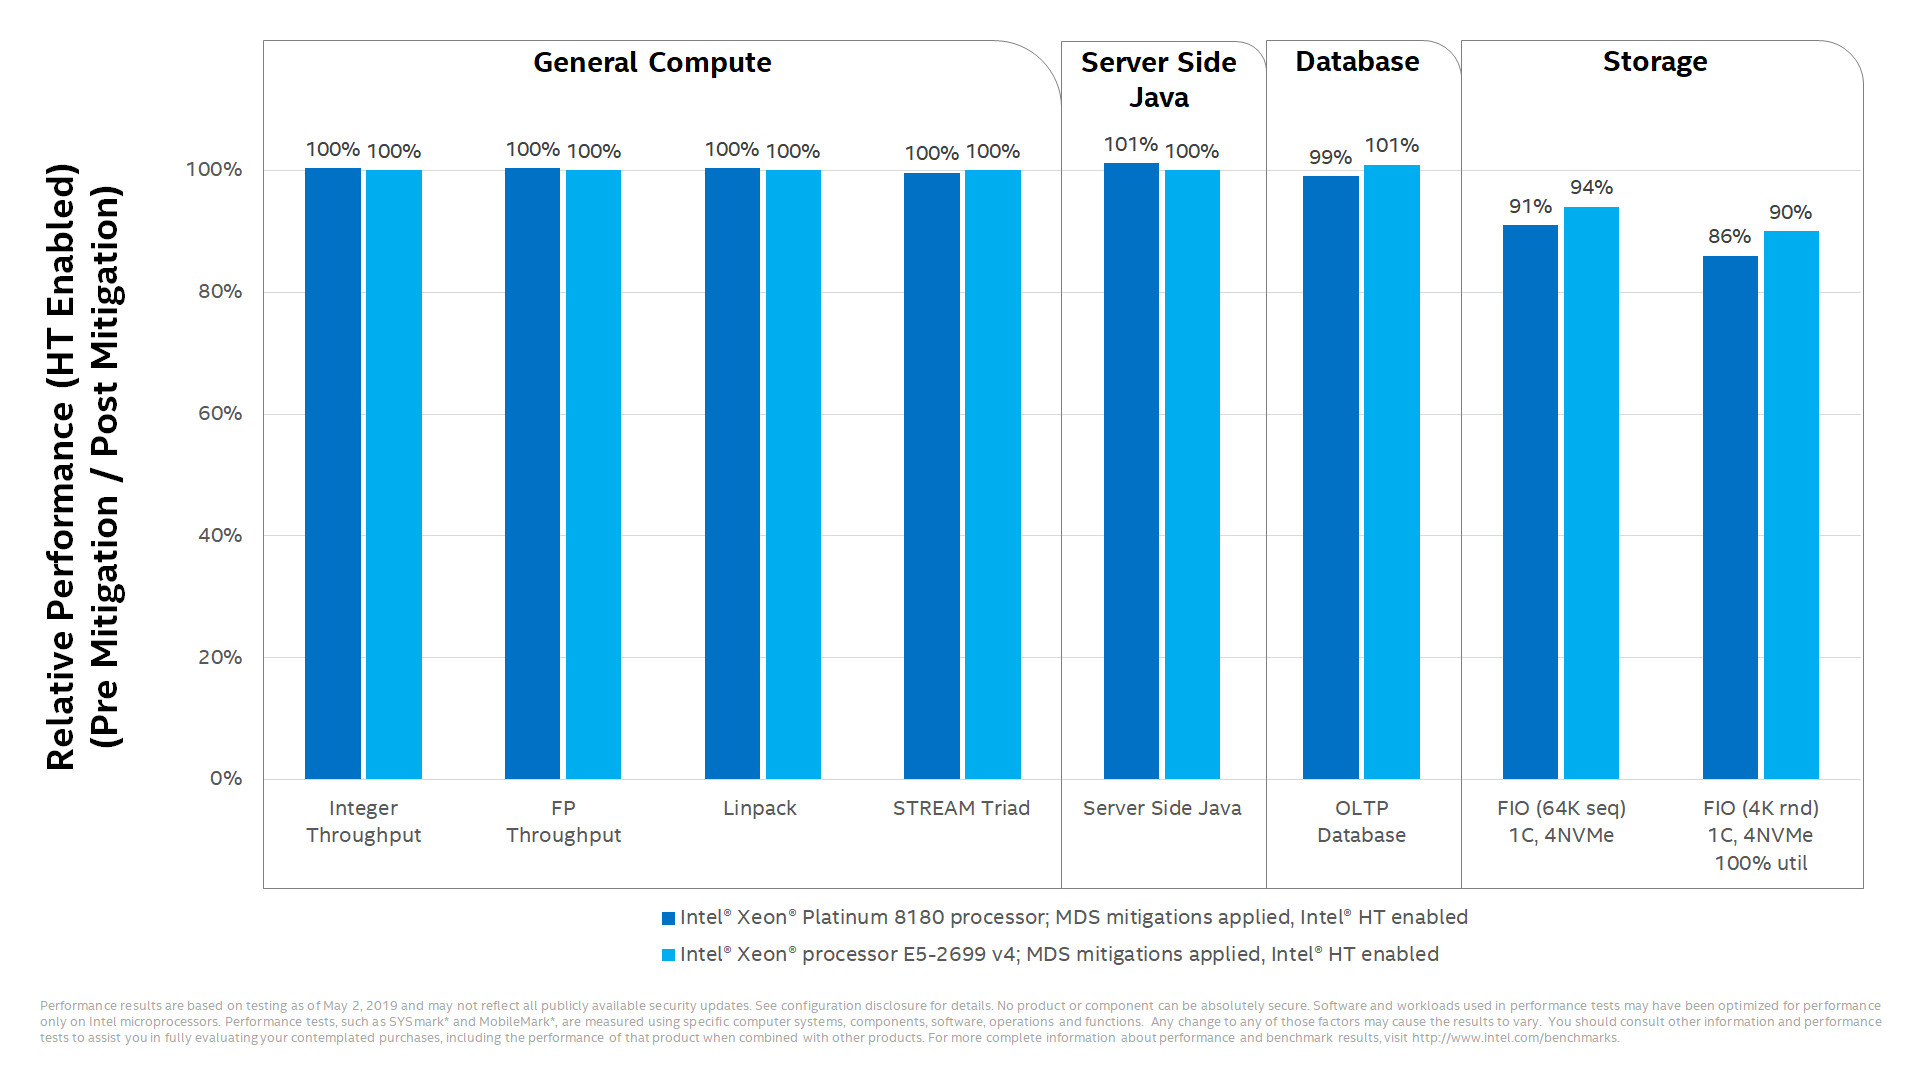 Intel Puts Out Benchmarks Showing Minimal Performance Impact of MDS | TechPowerUp